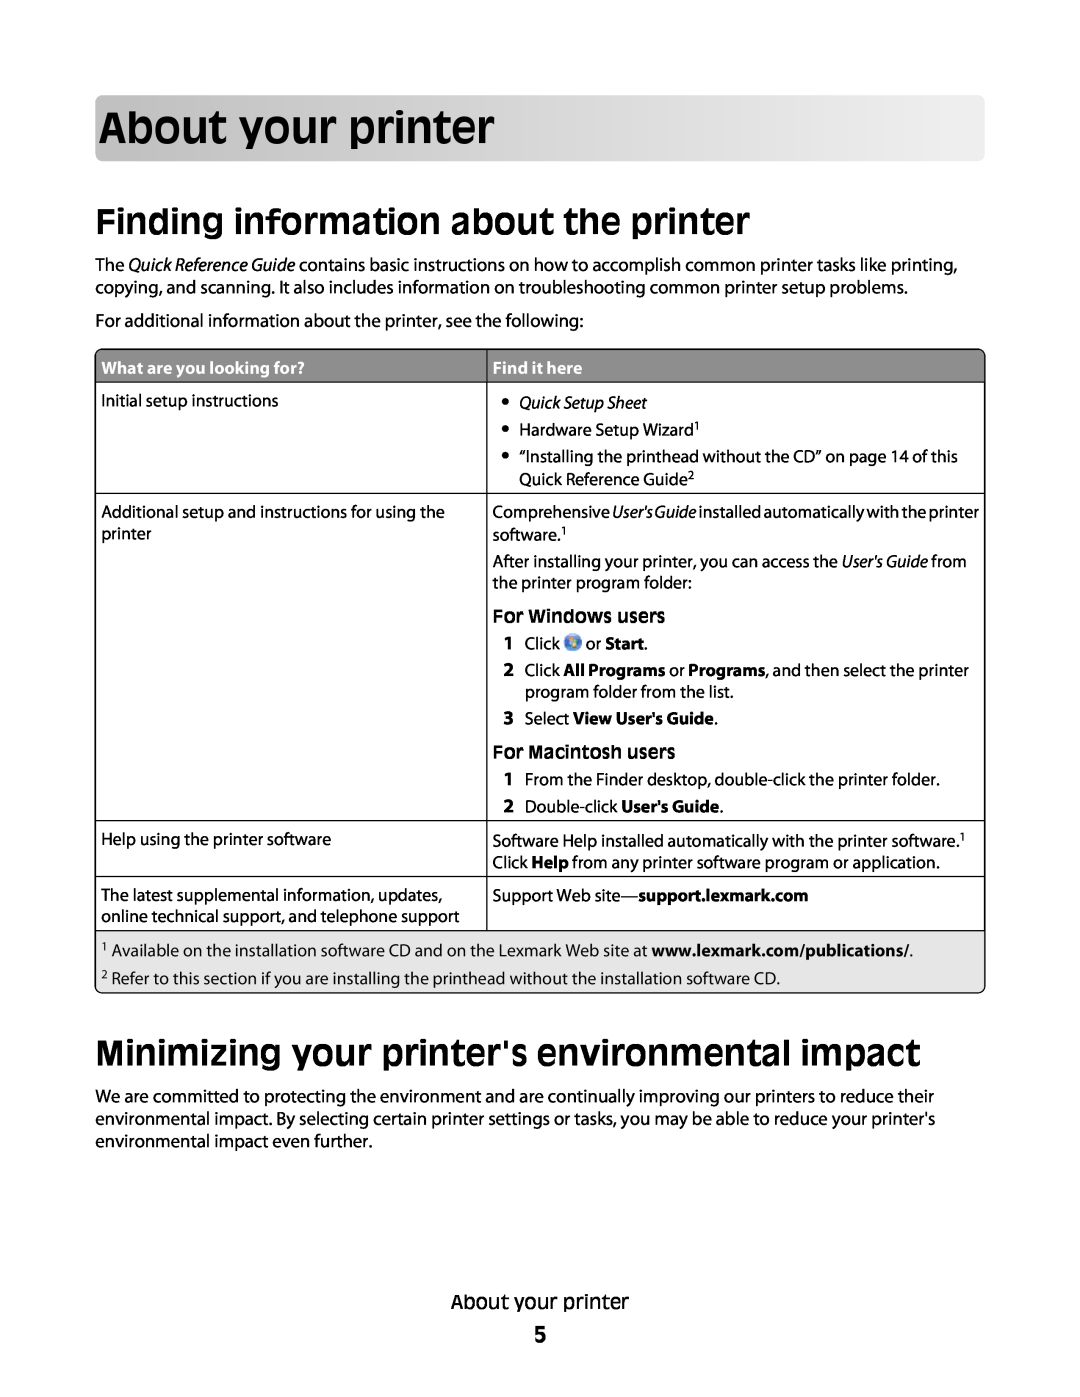 Lexmark S400 About your printer, Finding information about the printer, Minimizing your printers environmental impact 